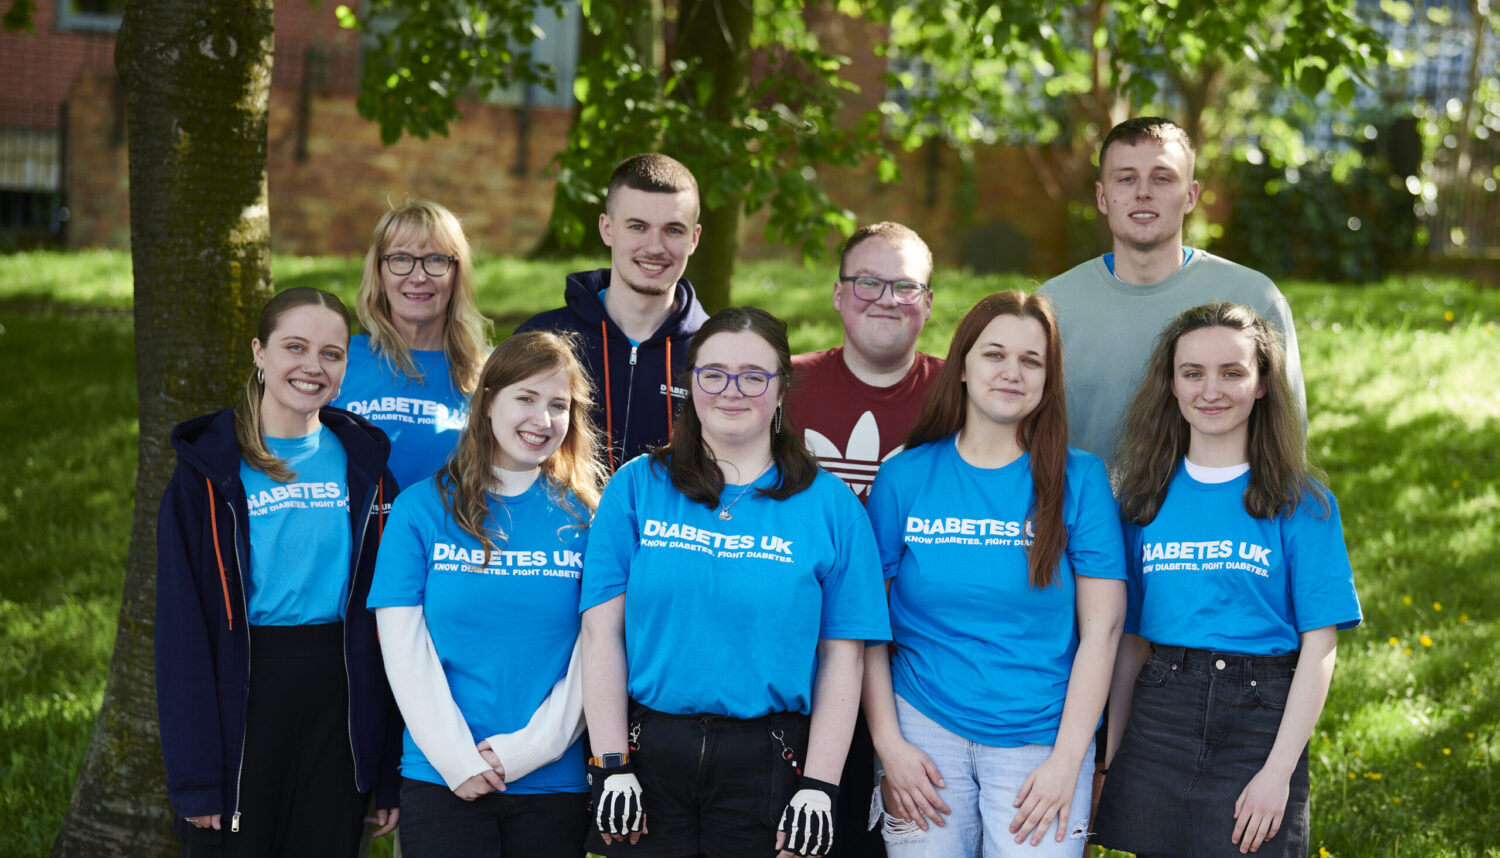 A group pose for a photo wearing Diabetes UK t-shirts. Our Lives Our Choices Our Voices - a Steve Morgan Foundation strategic partner.